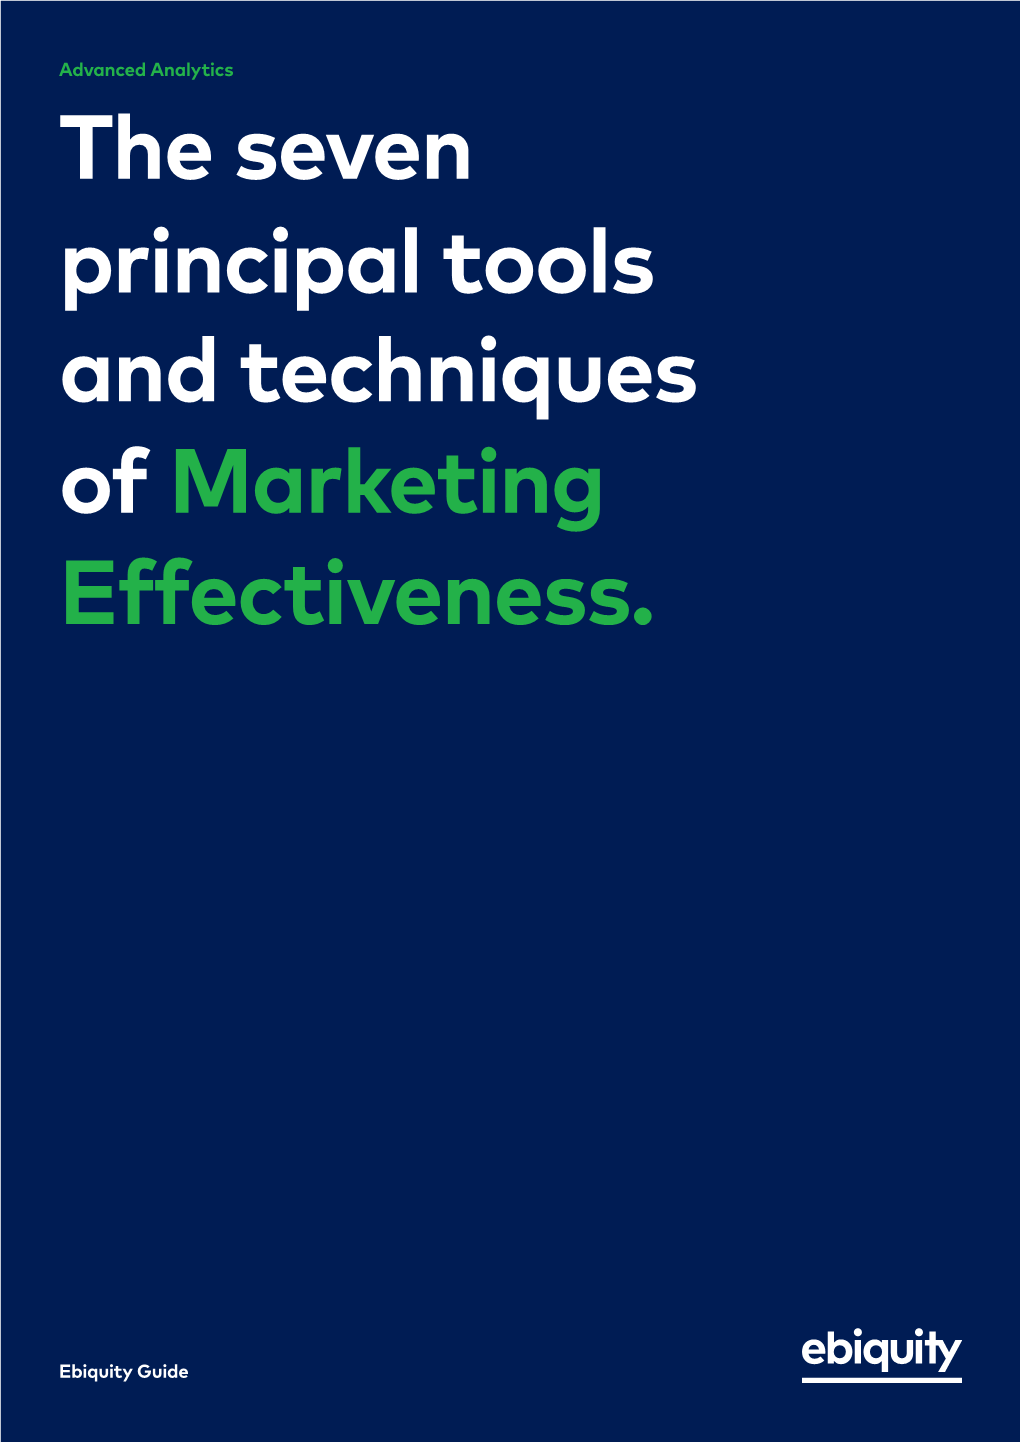 The Seven Principal Tools and Techniques of Marketing Effectiveness